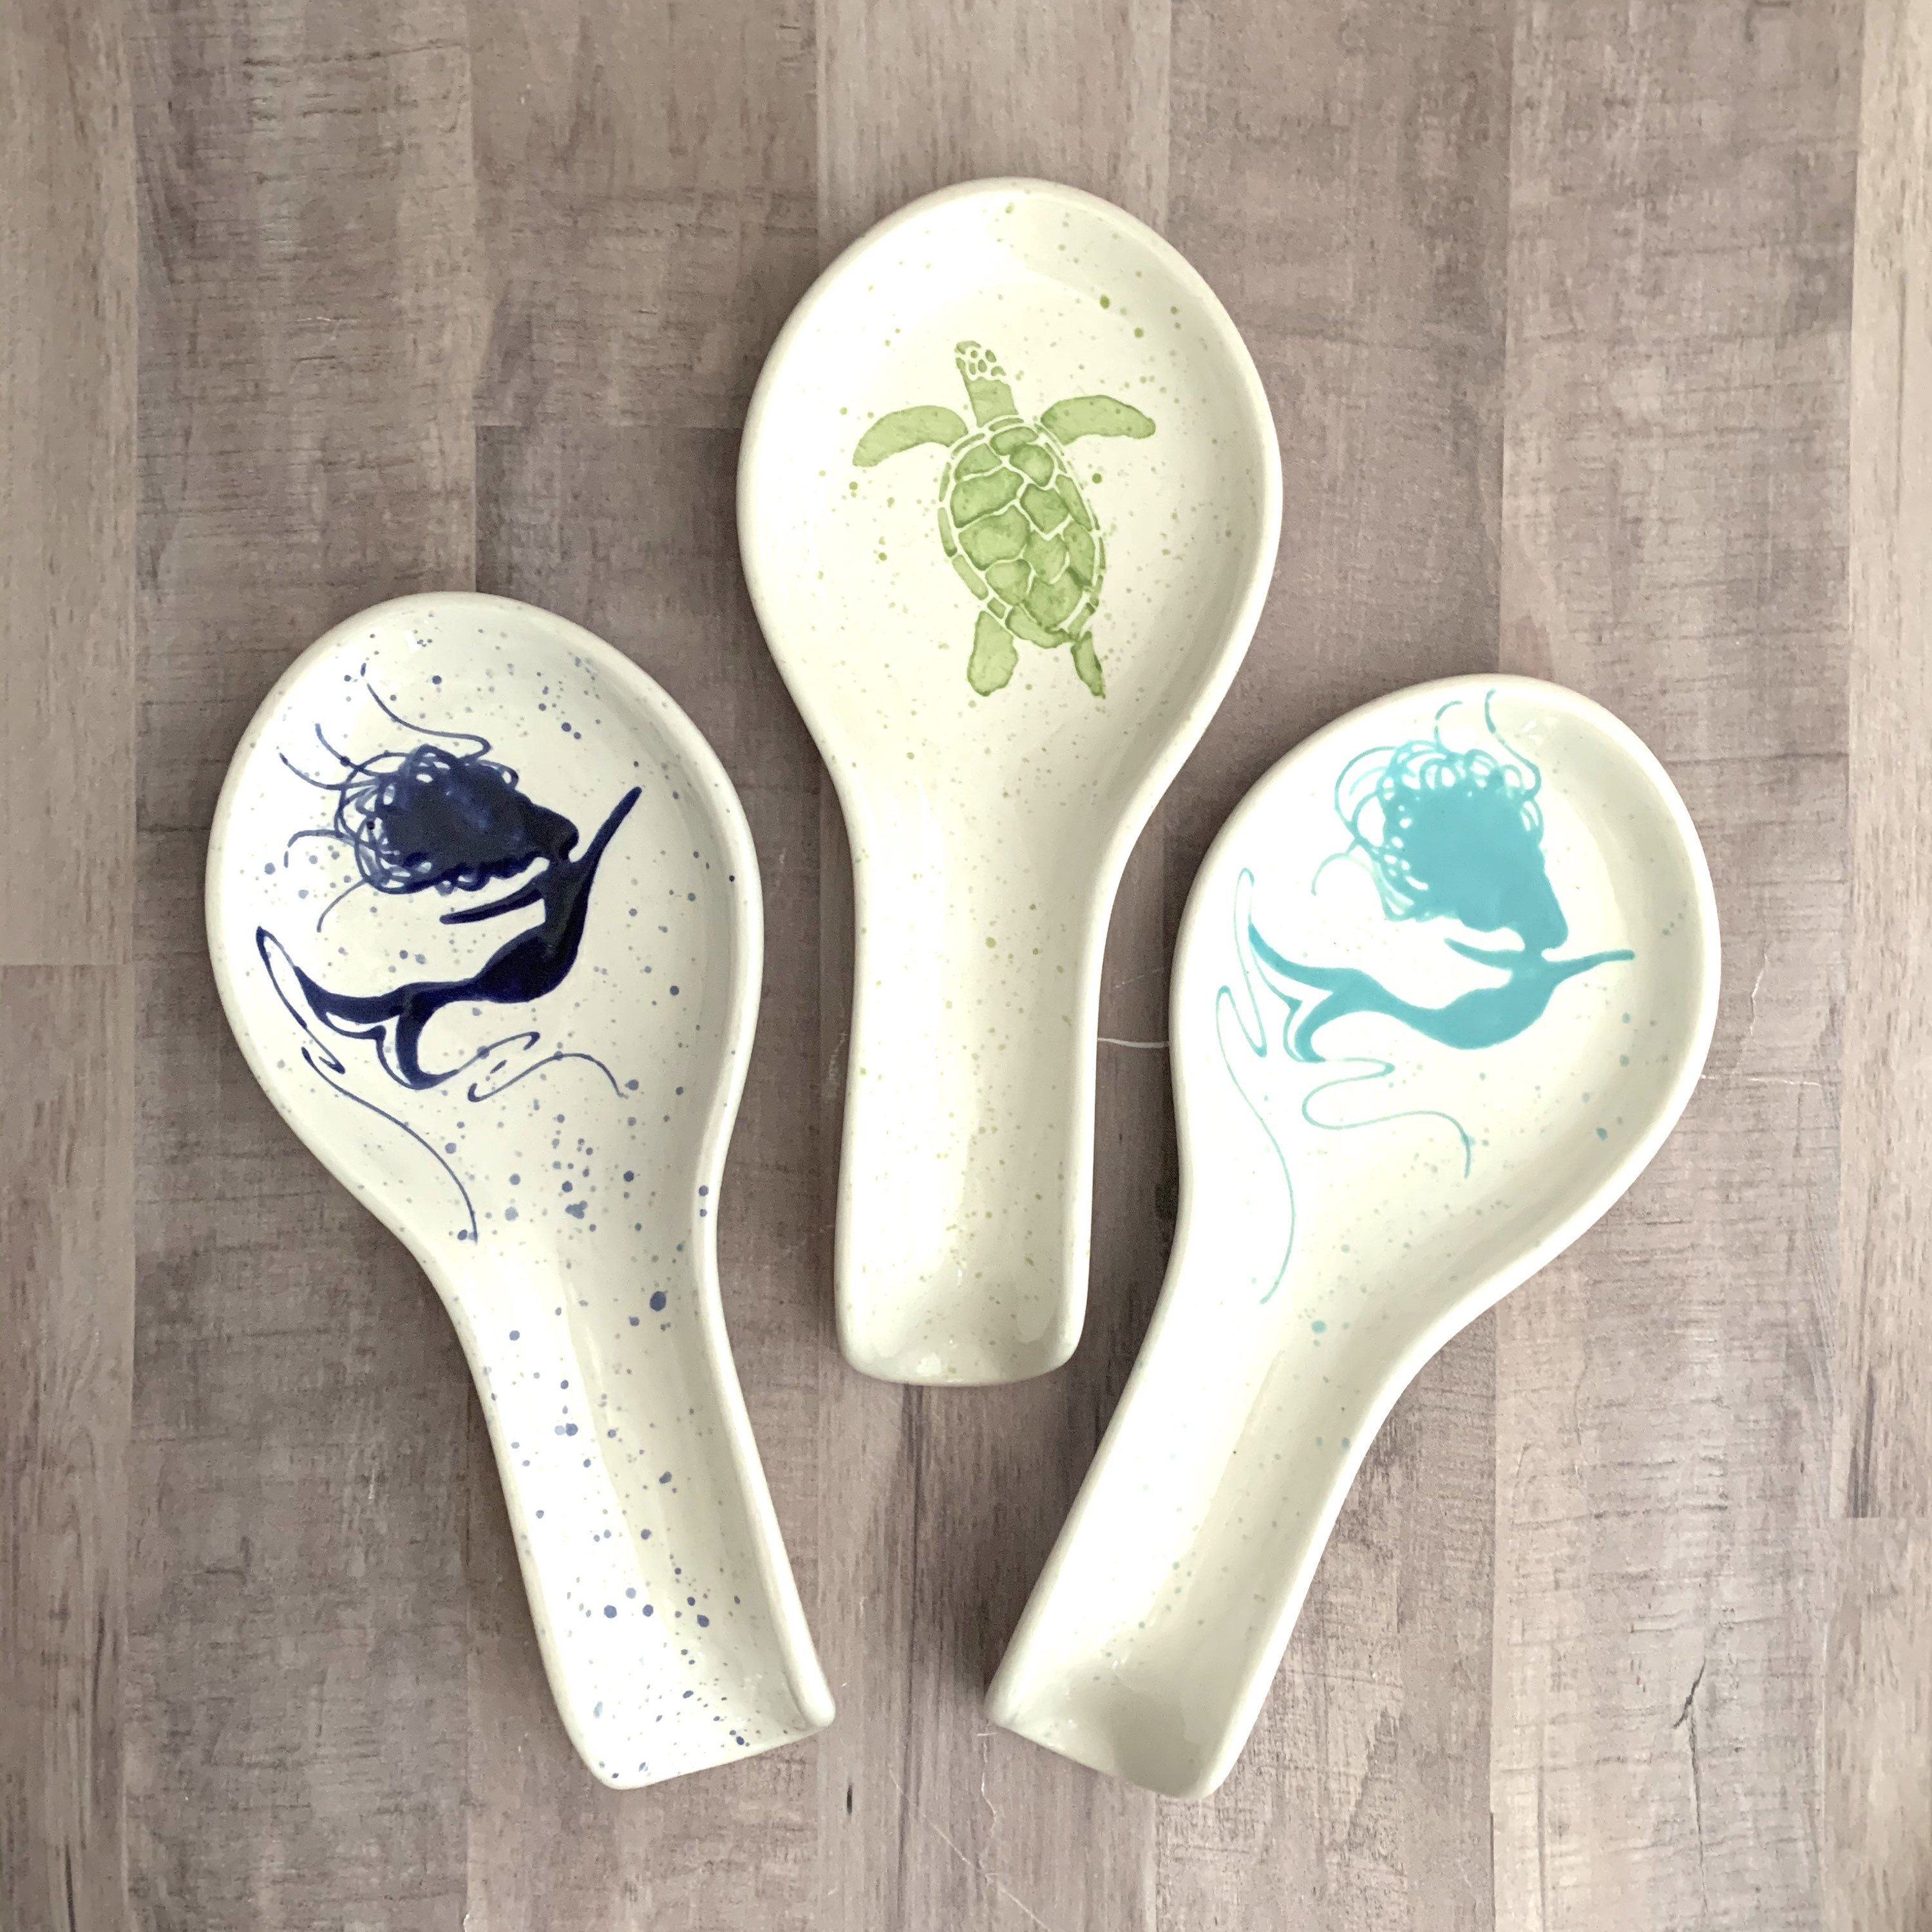 Crab spoon rest brings the beach to your stove top. Handmade by